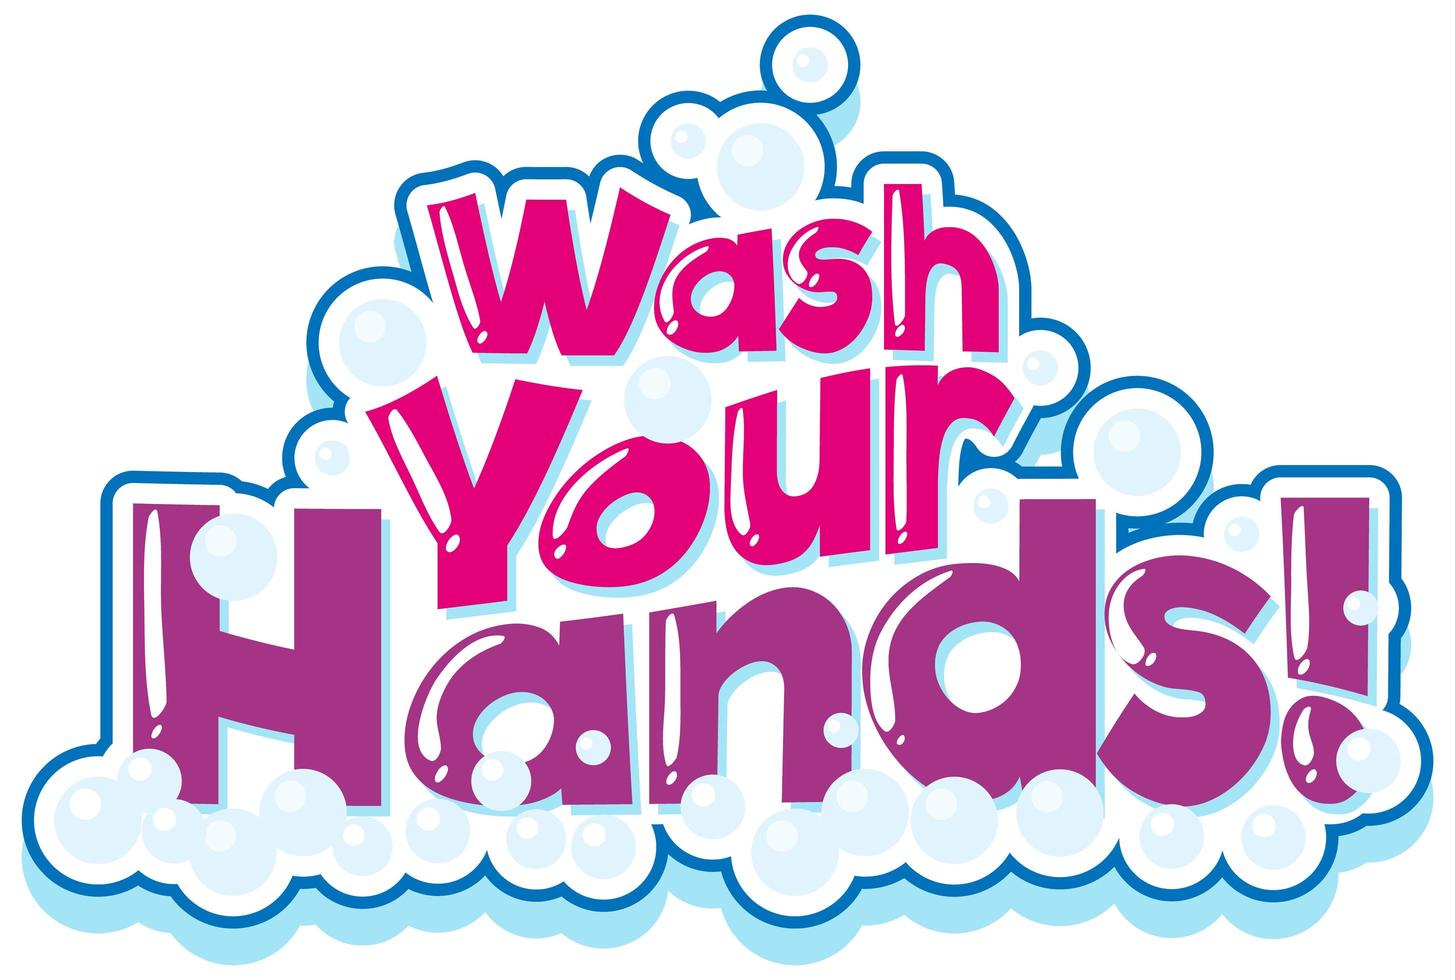 Wash your hands phrase in pink with bubbles vector